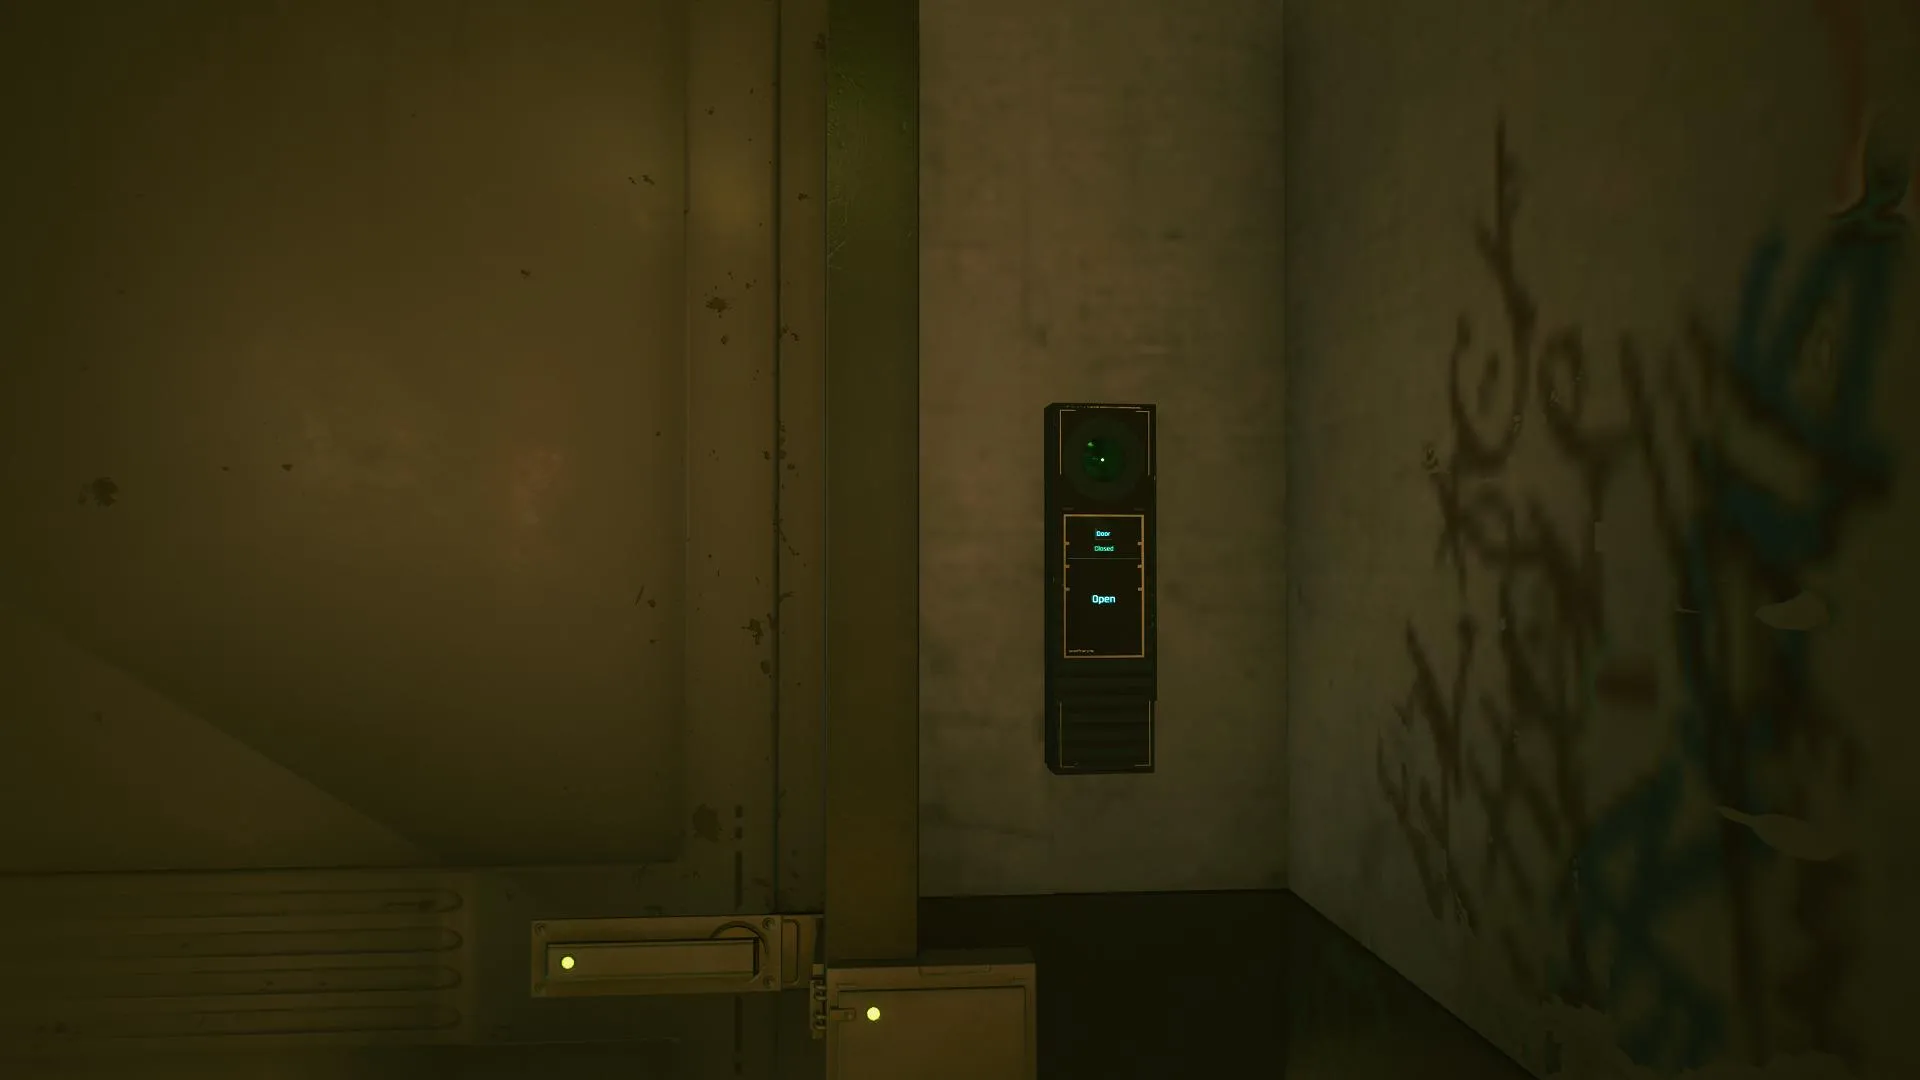 cyberpunk 2077 greed never pays gig leah apartment door code